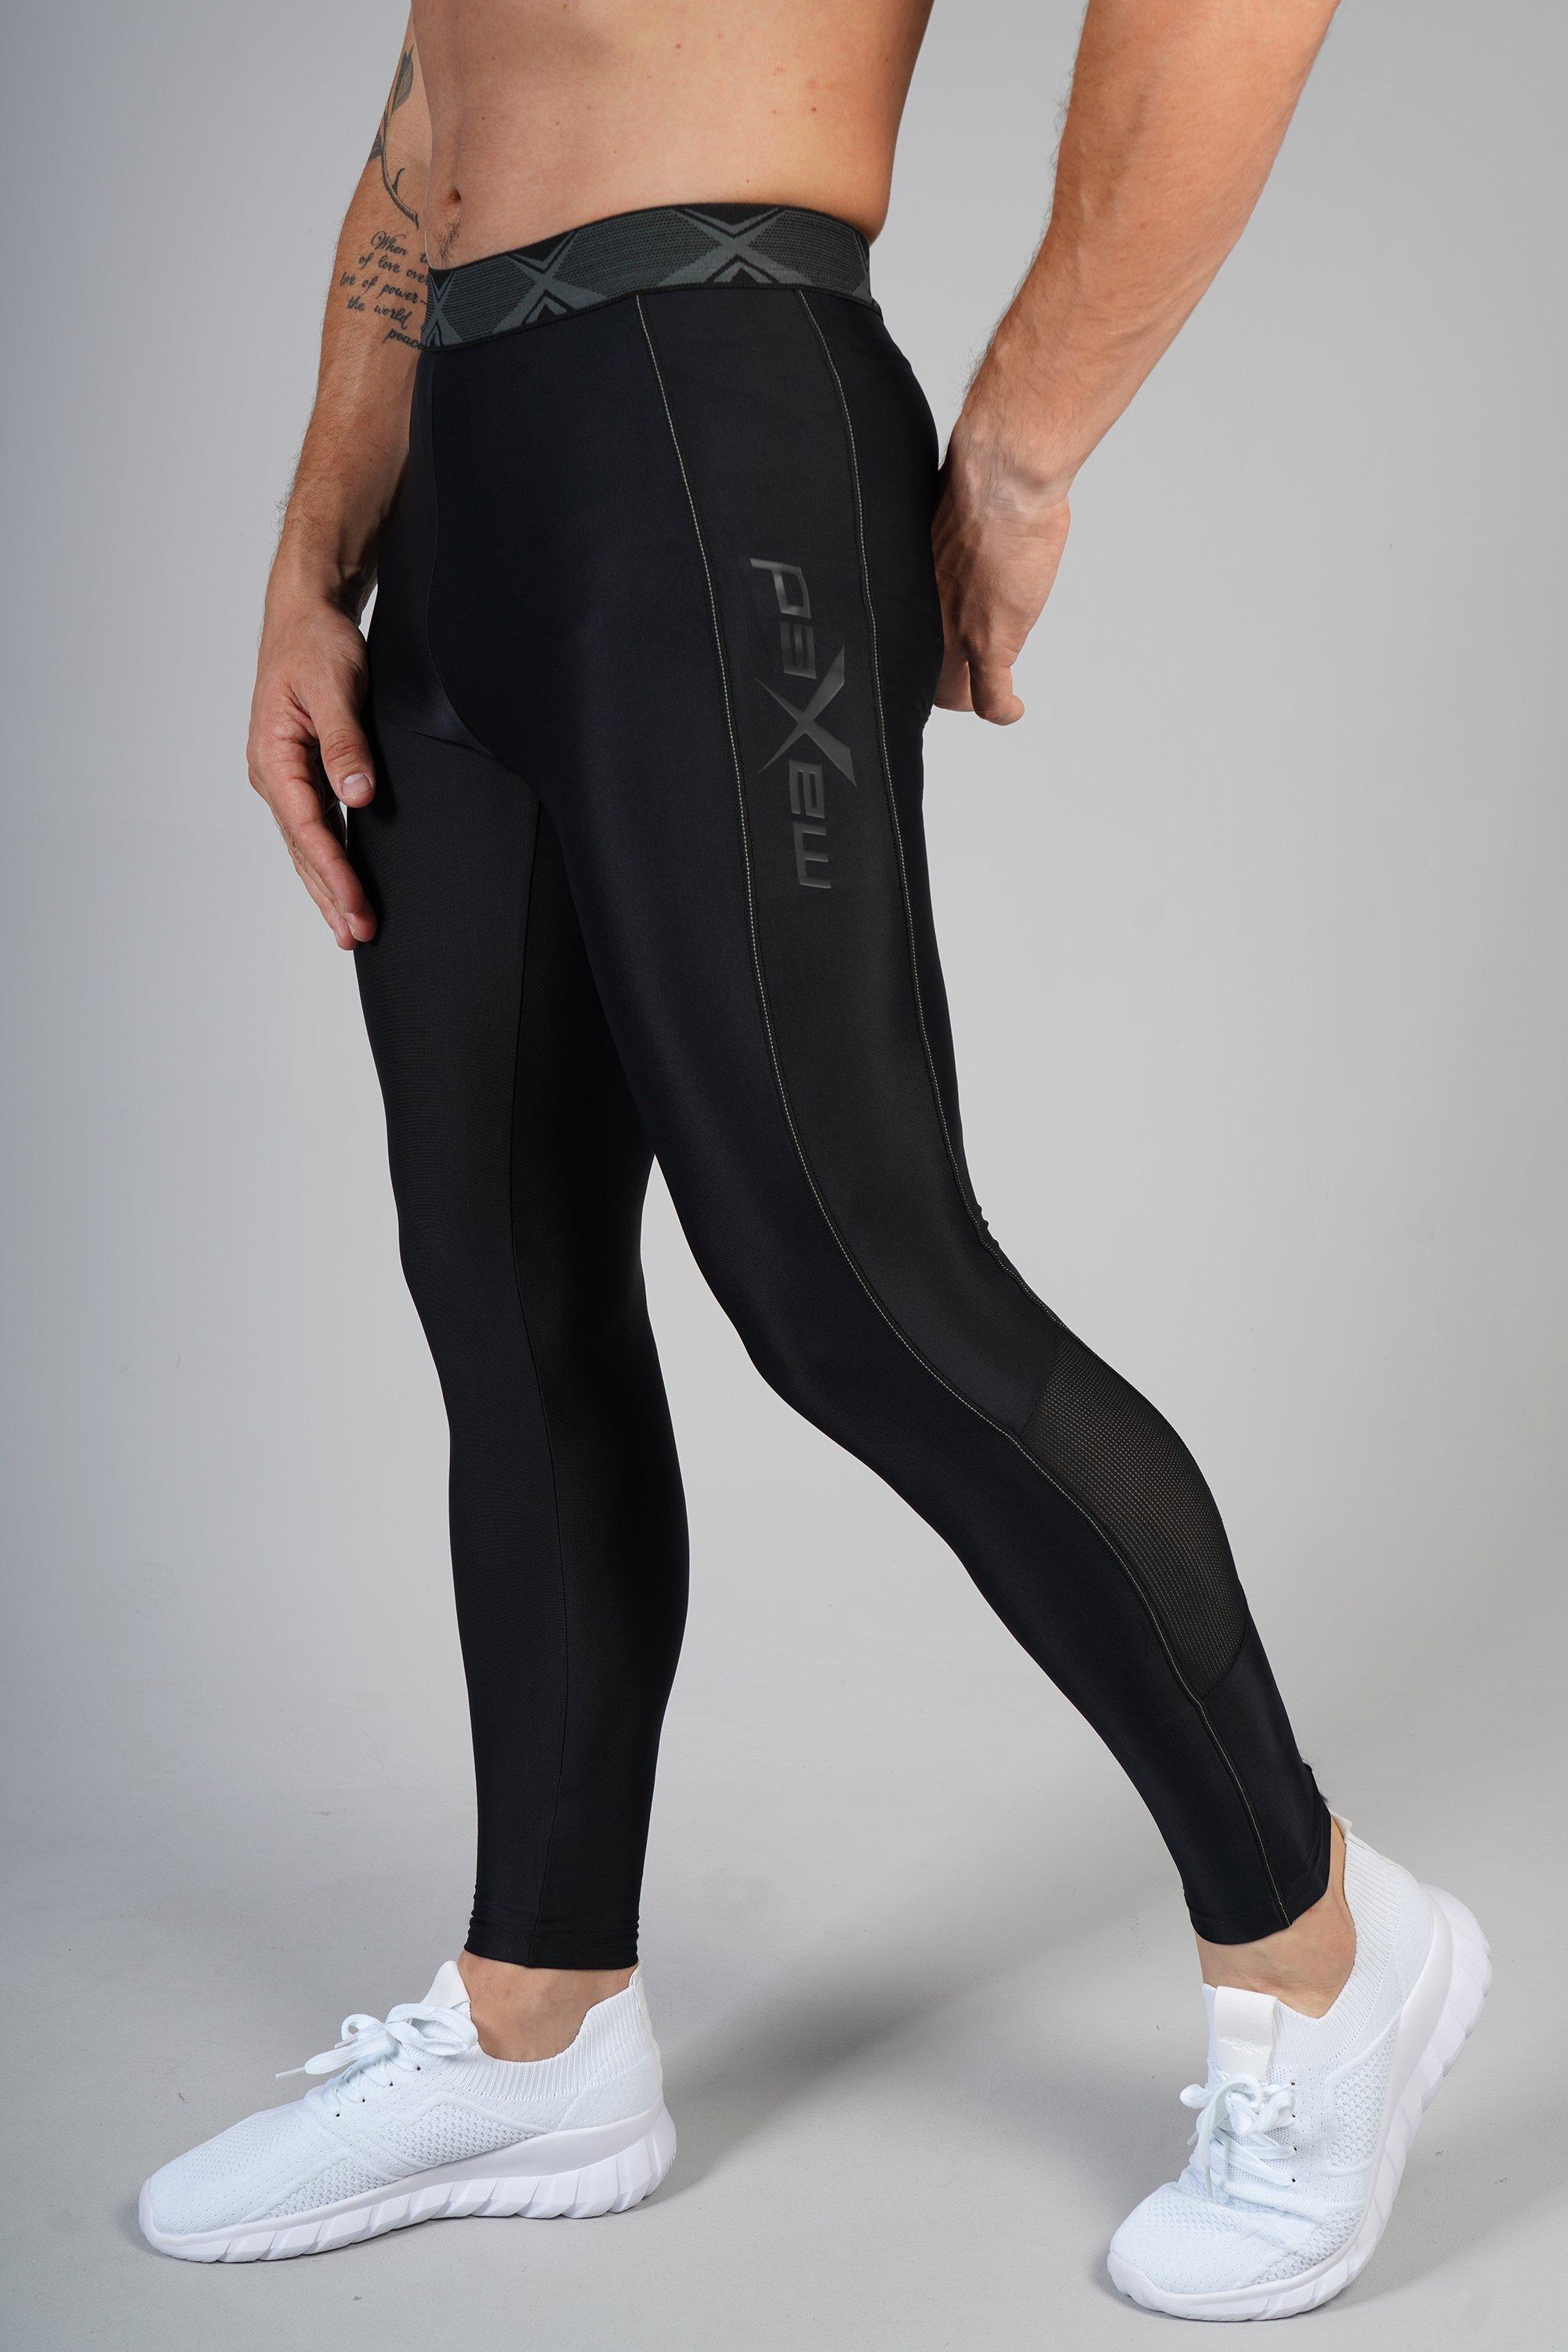 Mr Price Sport - Why we love our Maxed Elite Power Tights?